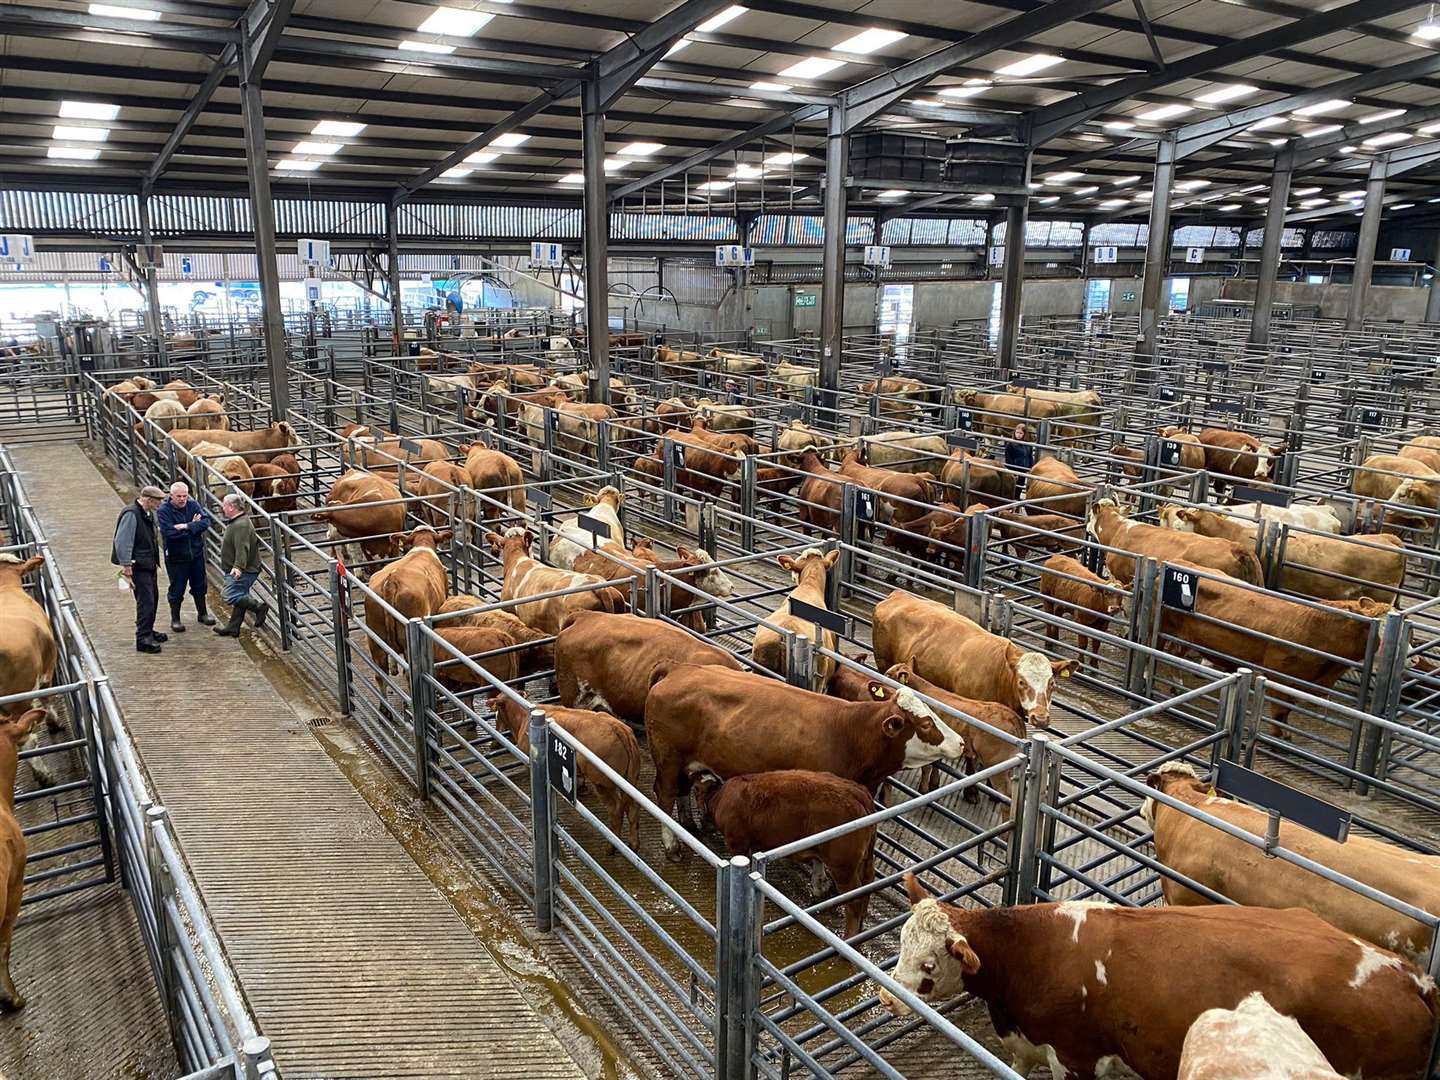 Cattle trading at Thainstone is at higher price point levels than last year.